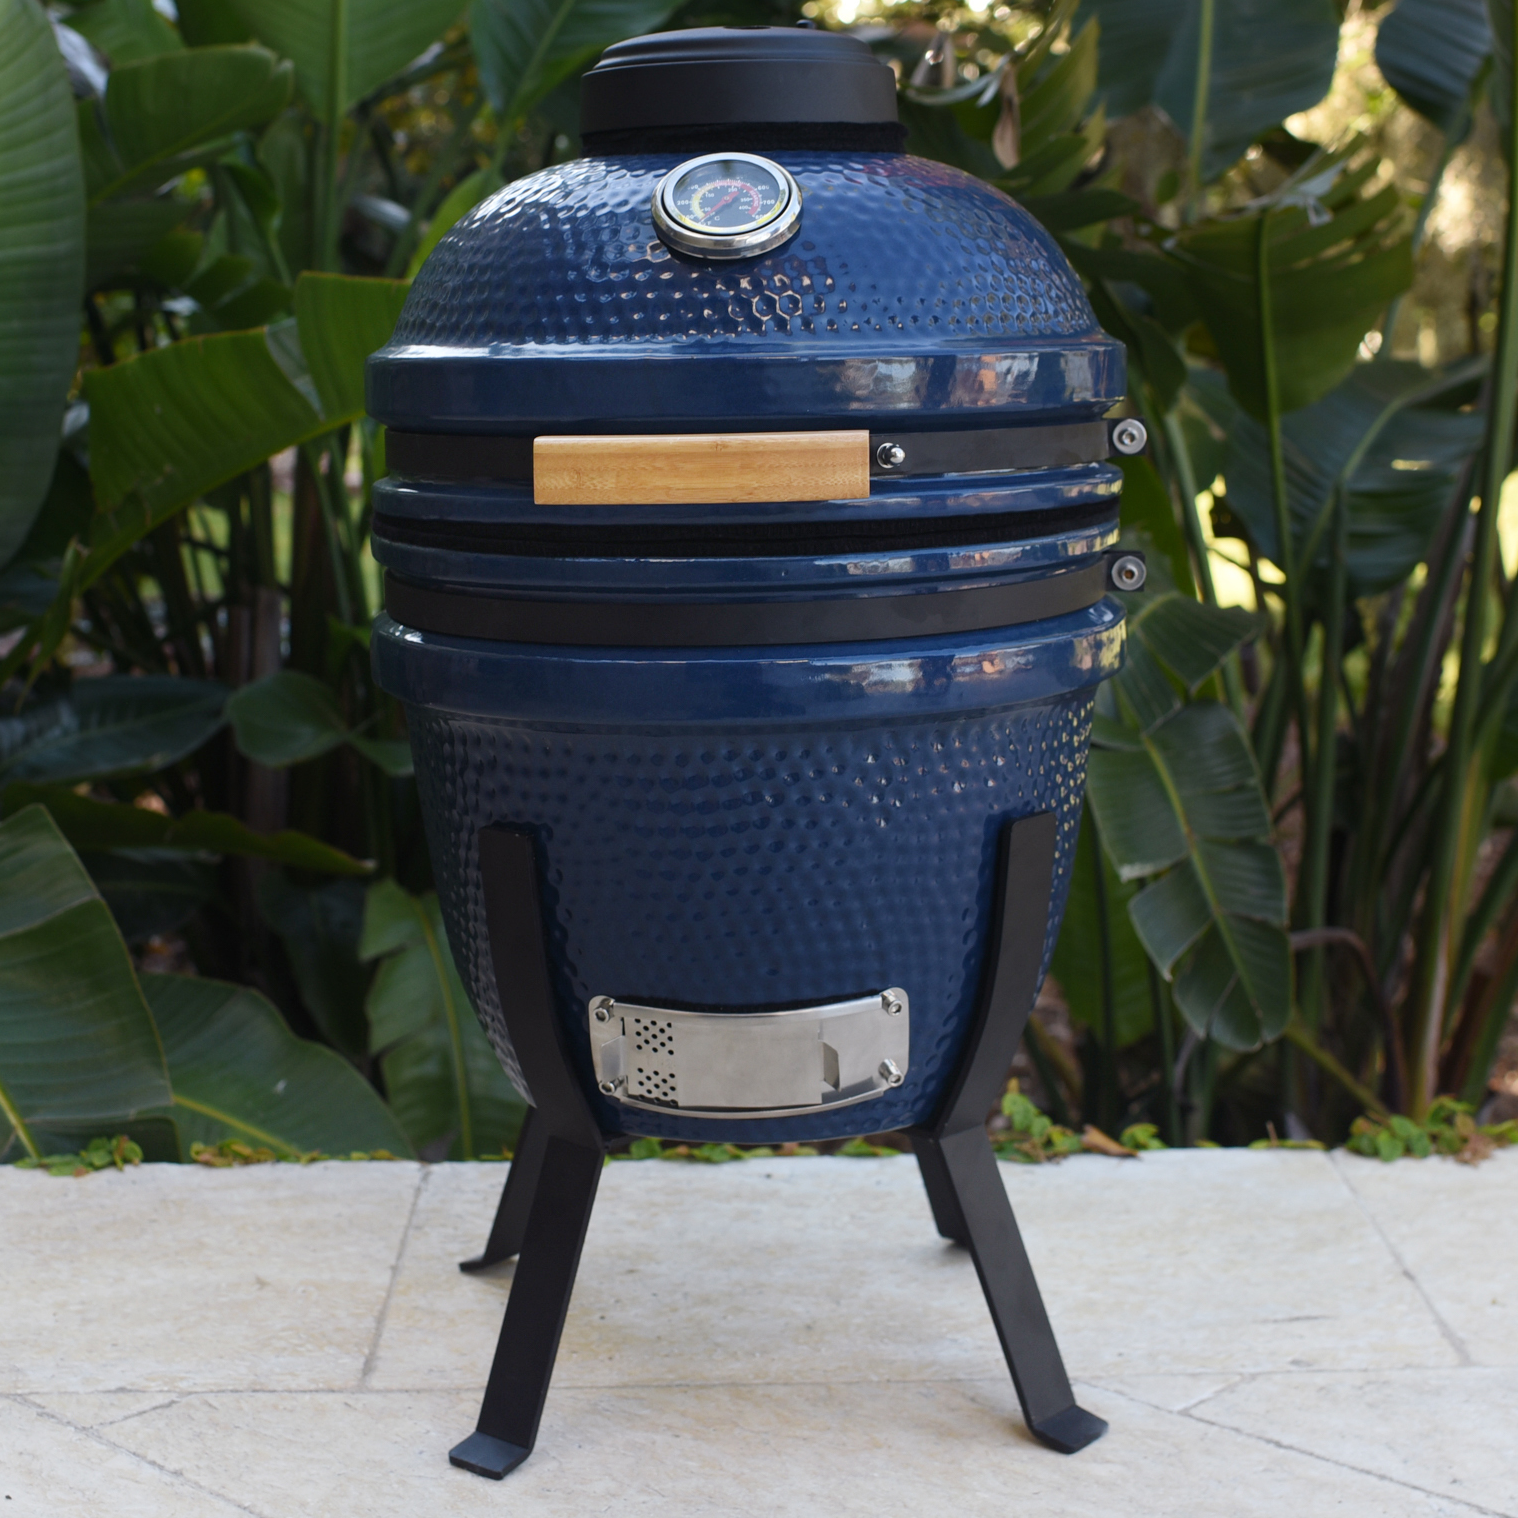 Lifesmart 15" Blue Kamado Ceramic Grill Value Bundle Includes Electric Starter Cooking Stone and Cover - image 1 of 15